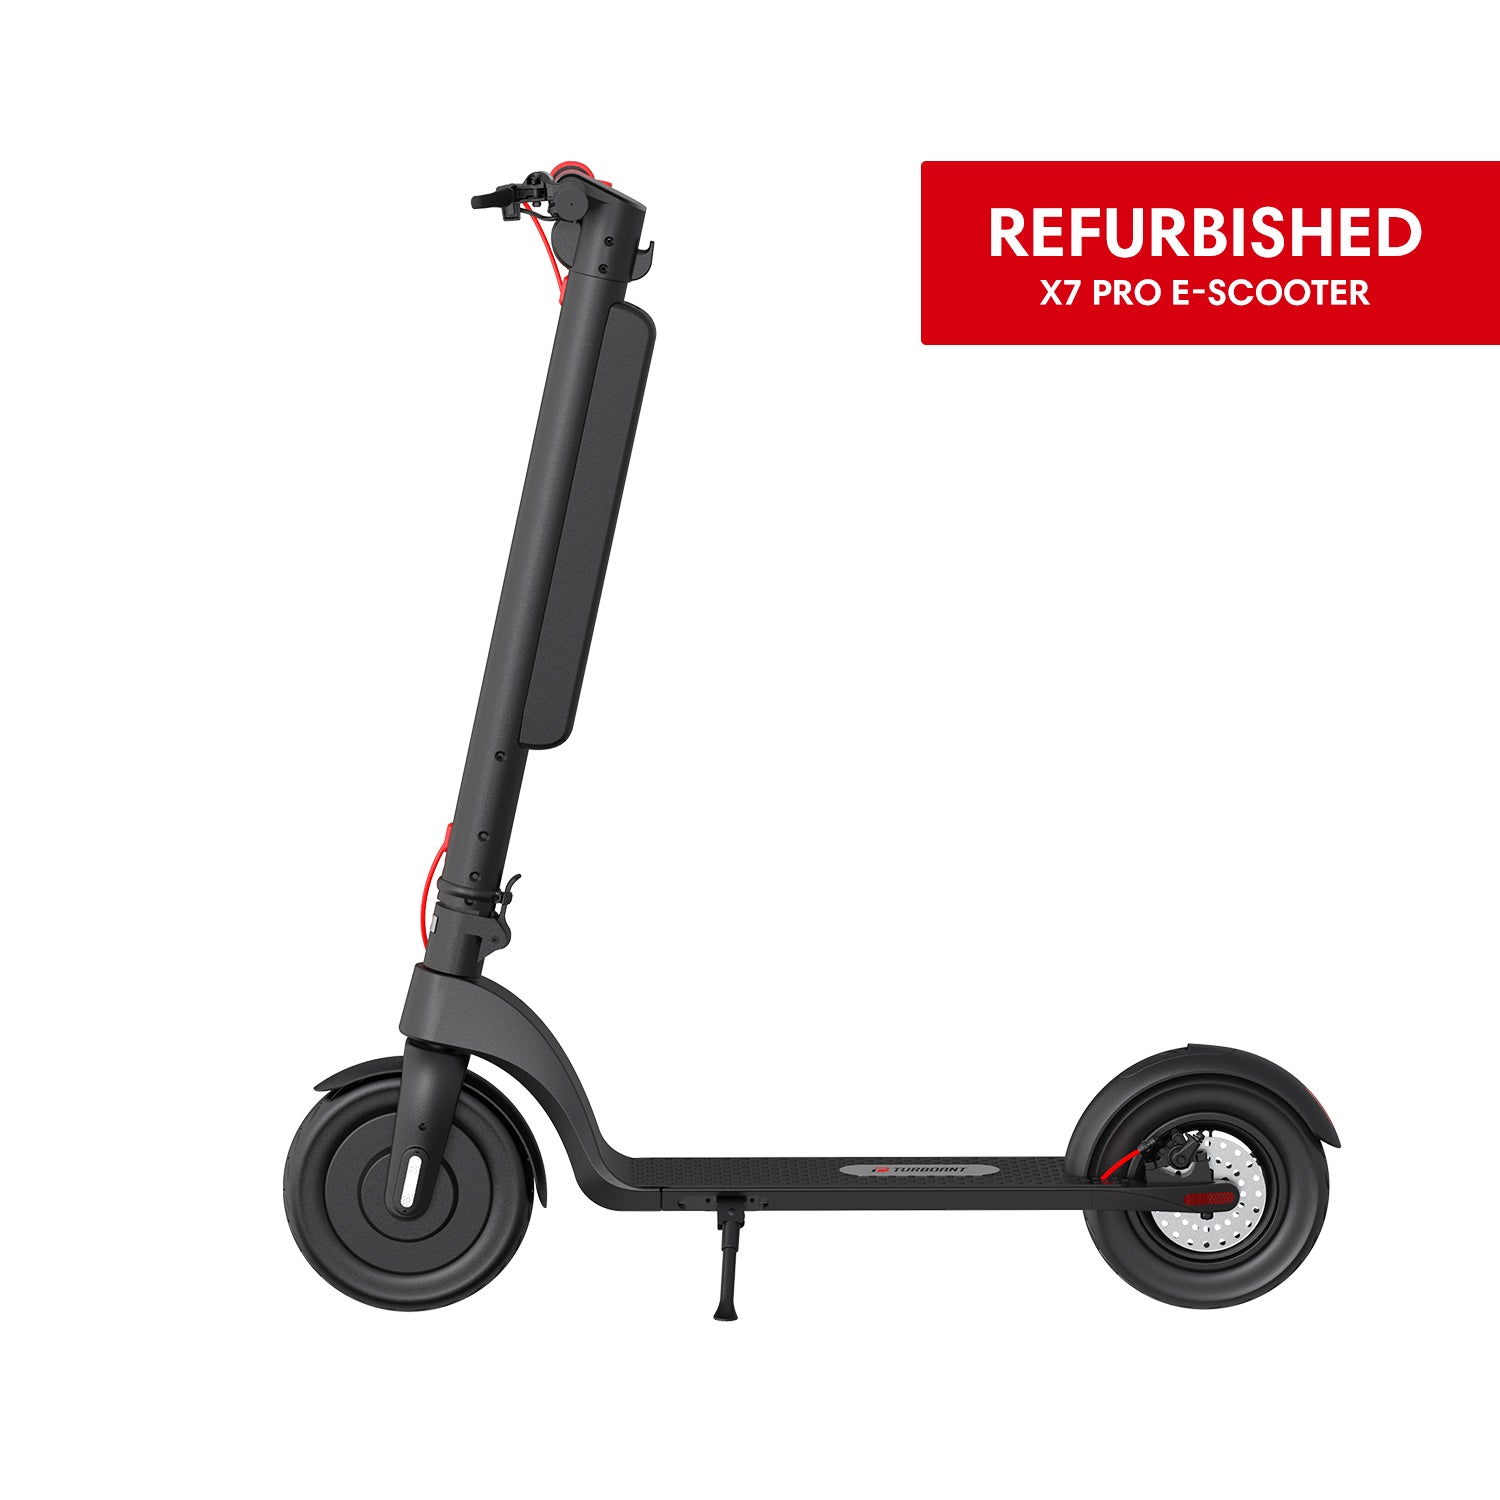 Turboant X7 Pro refurbished electric scooter